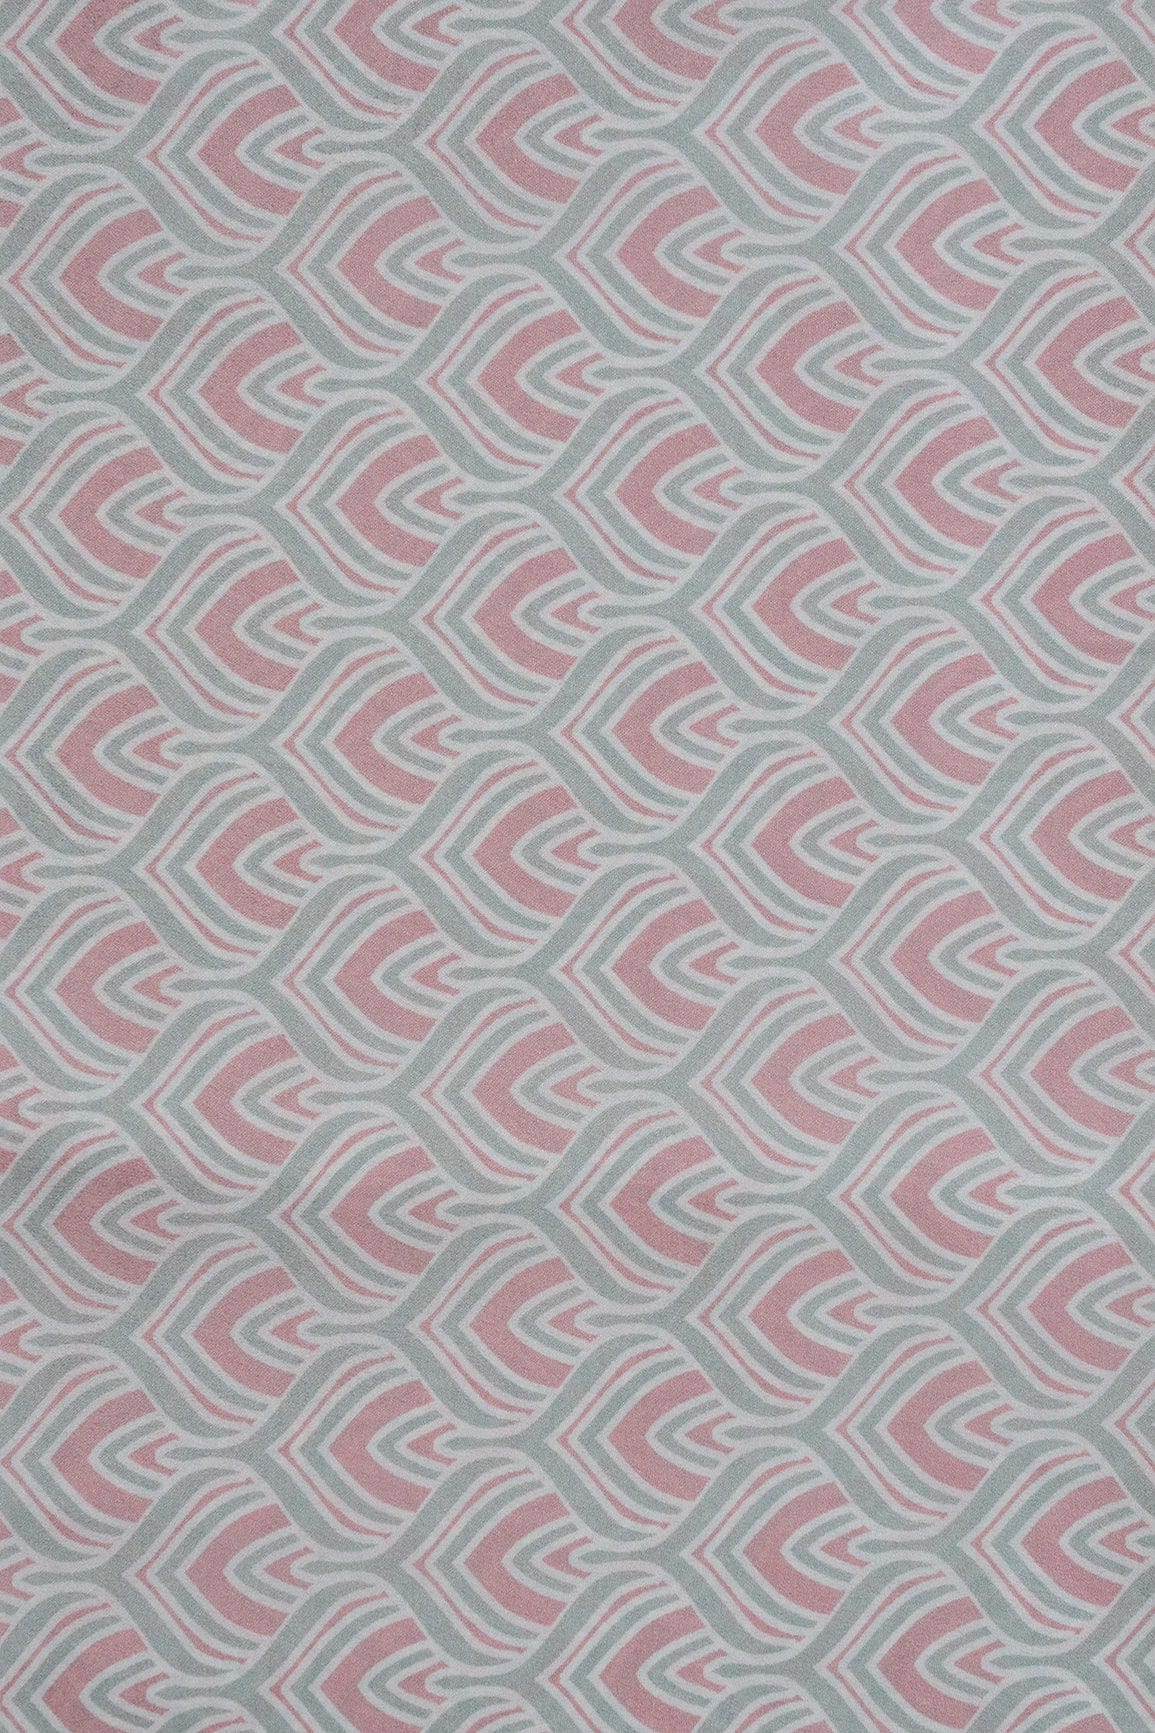 doeraa Prints Pastel Green And Rose Gold Trellis Pattern Digital Print On white French Crepe Fabric